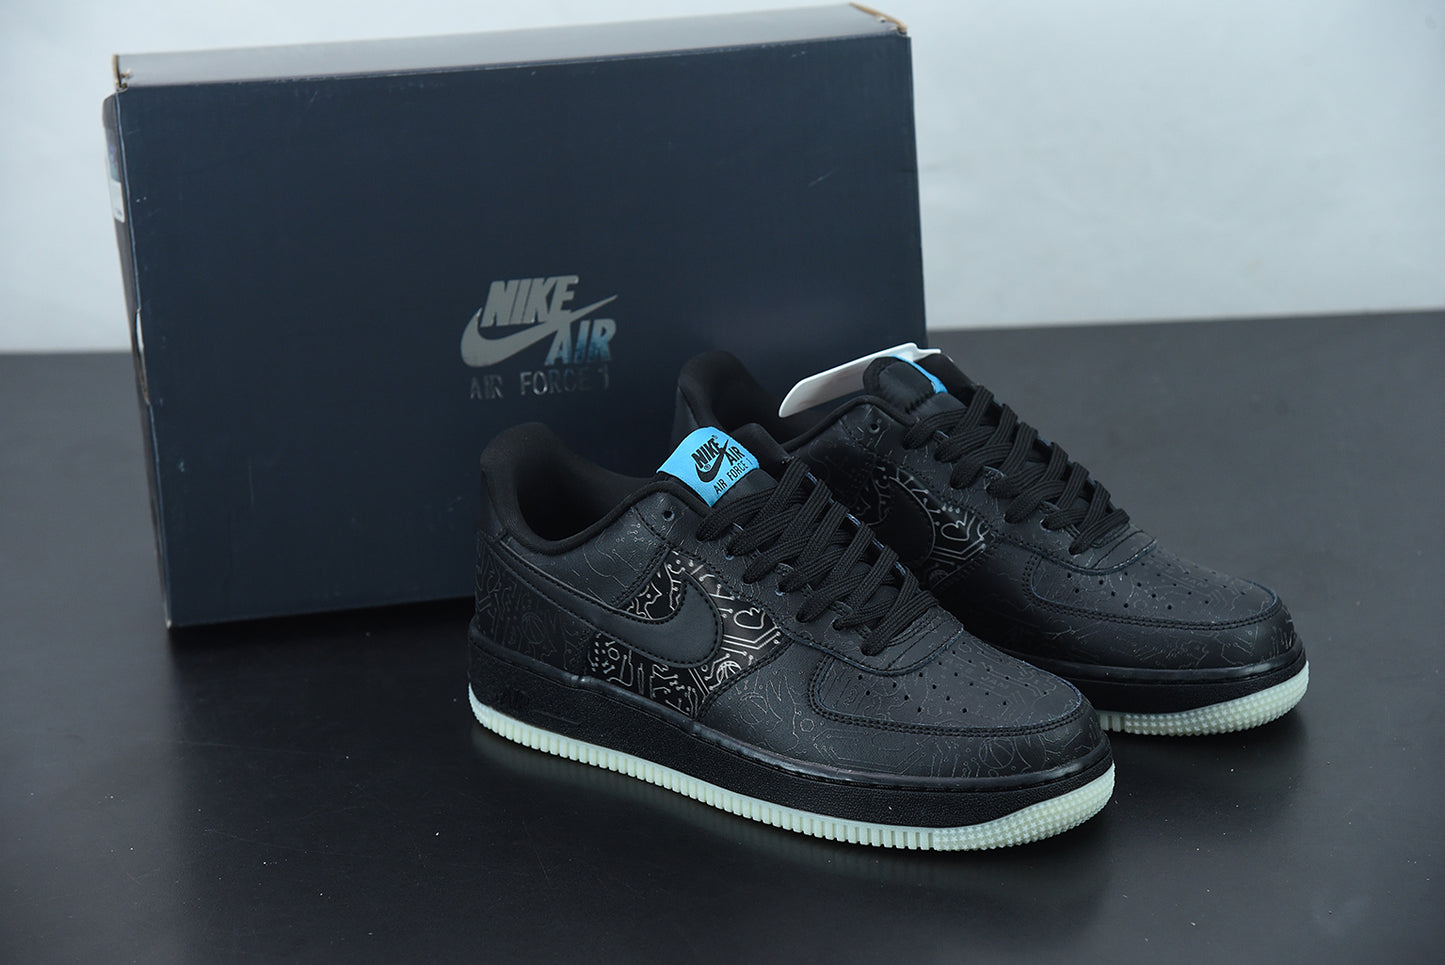 Nike Air Force 1 Computer Chip Space Jam